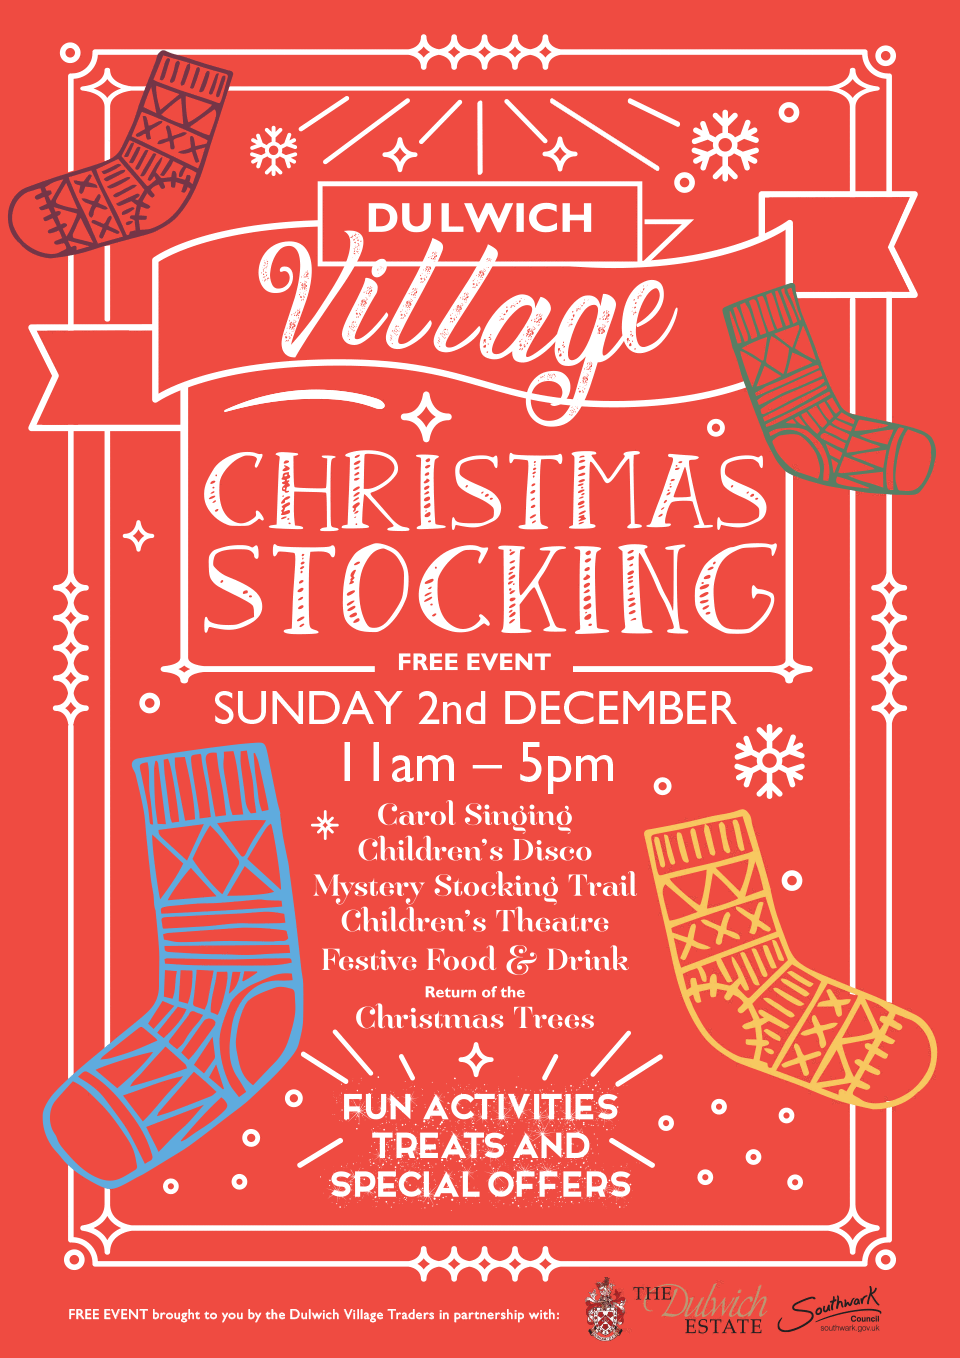 Come along to Dulwich Village Christmas Stocking 